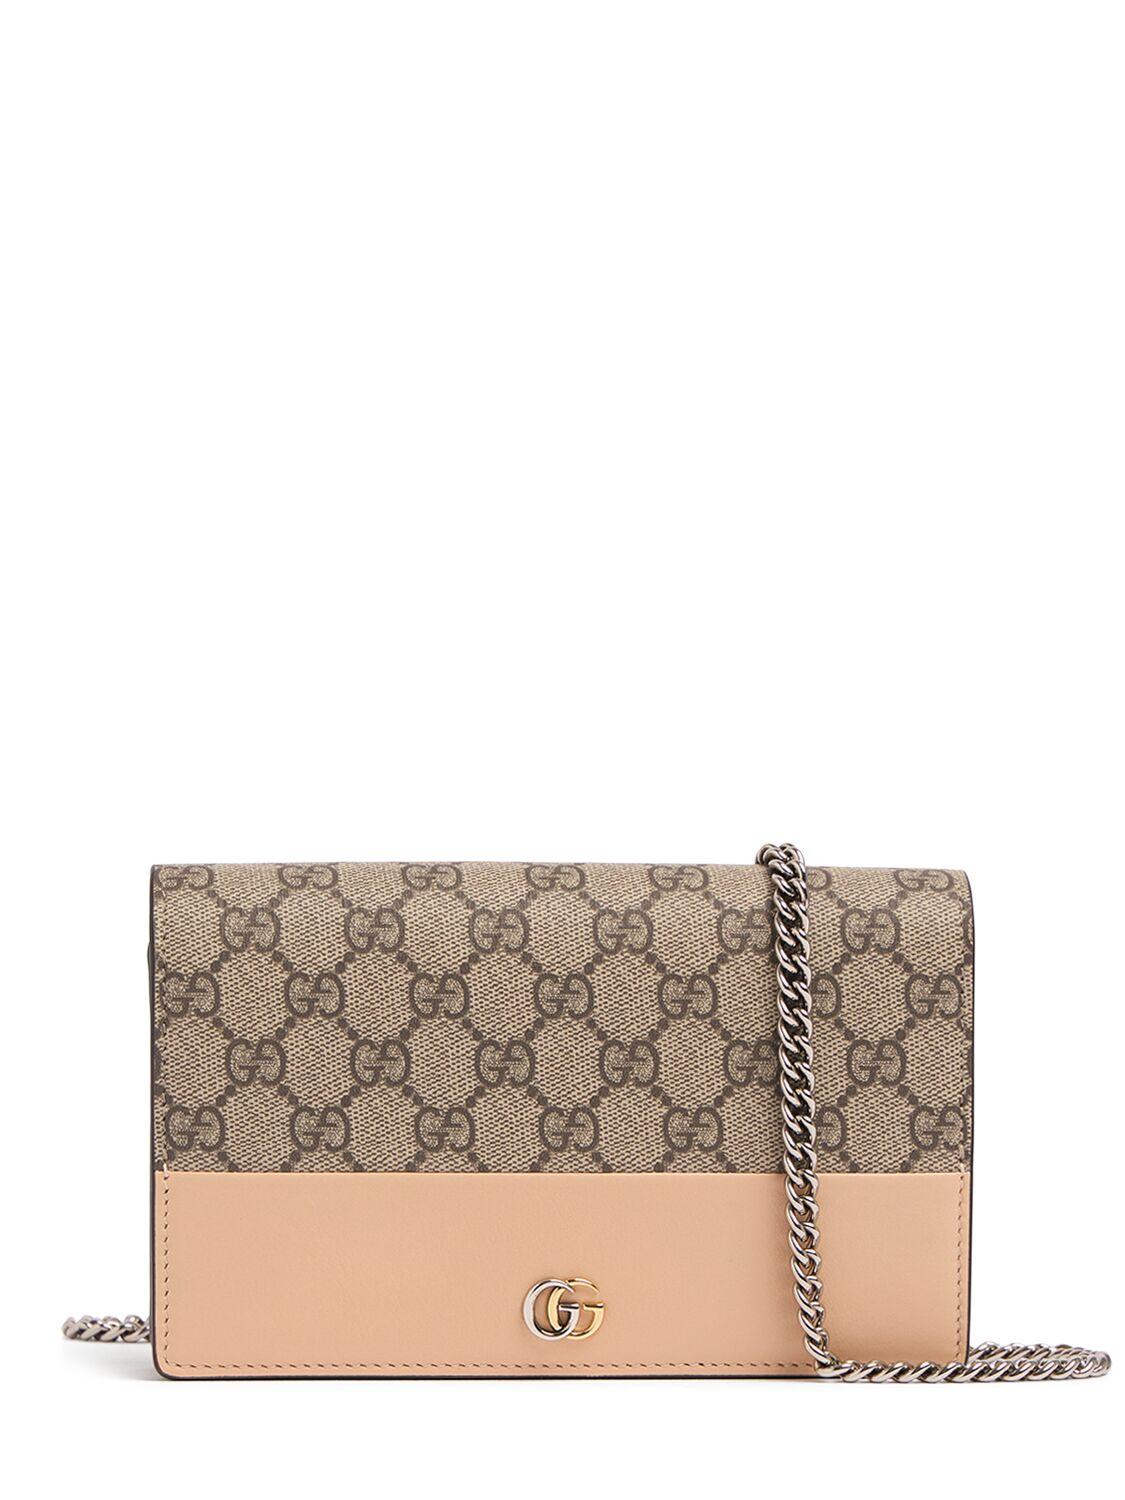 Gucci Petite Marmont Leather Wallet On Chain in Gray | Lyst